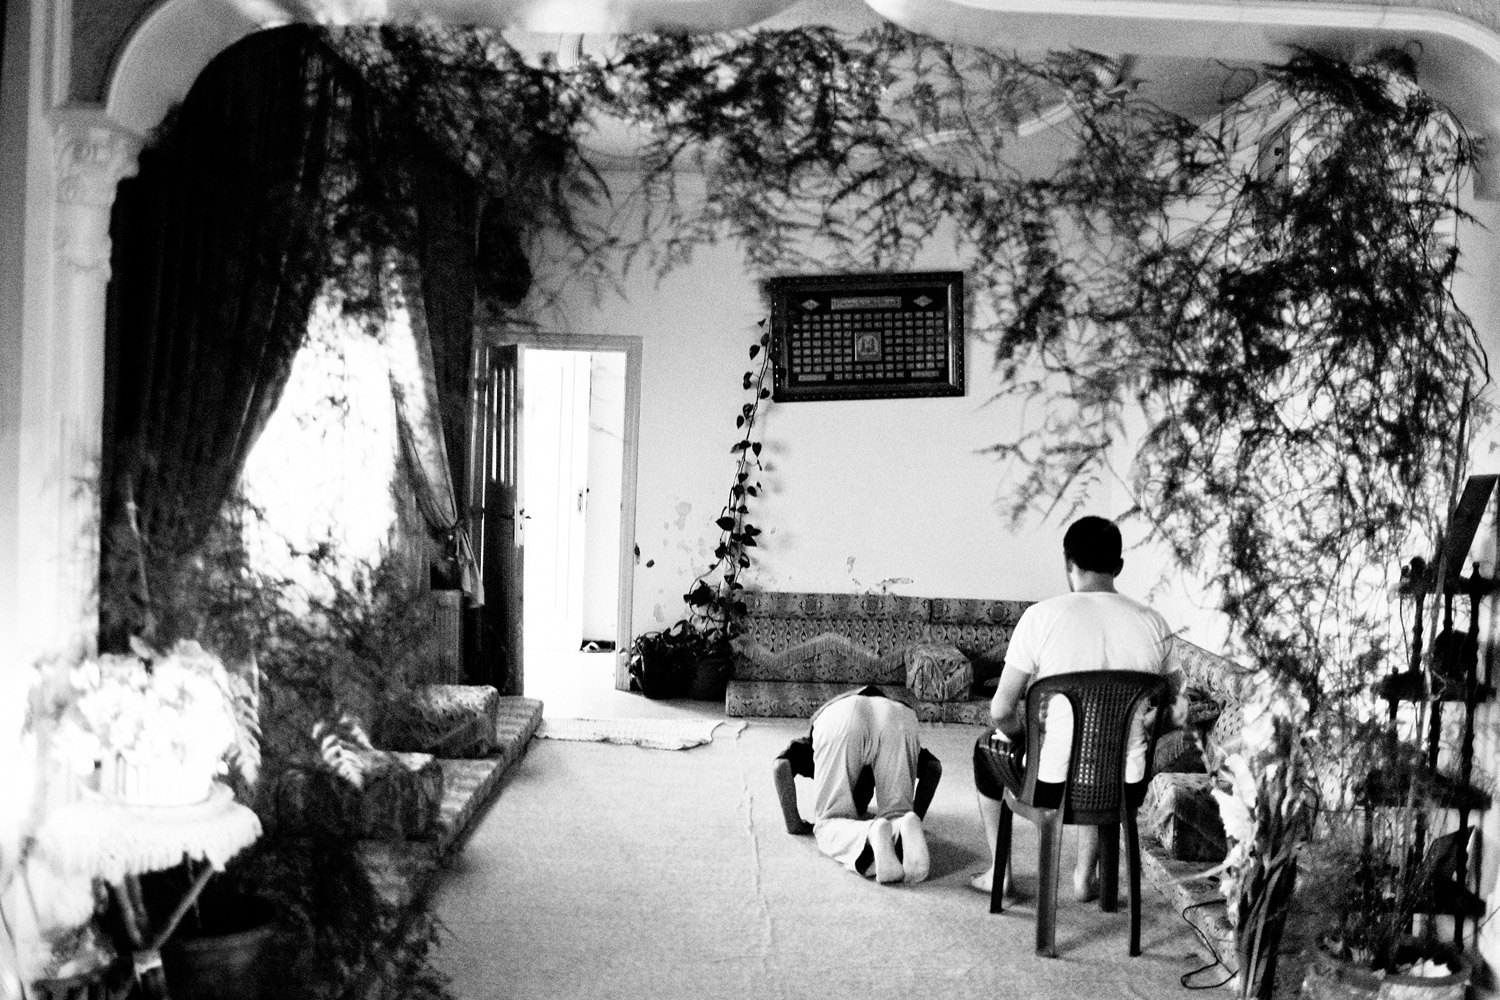 Leaders of the Syrian anti-regime protest movement in Homs pray inside a safe house at an undisclosed location, July 17, 2011.